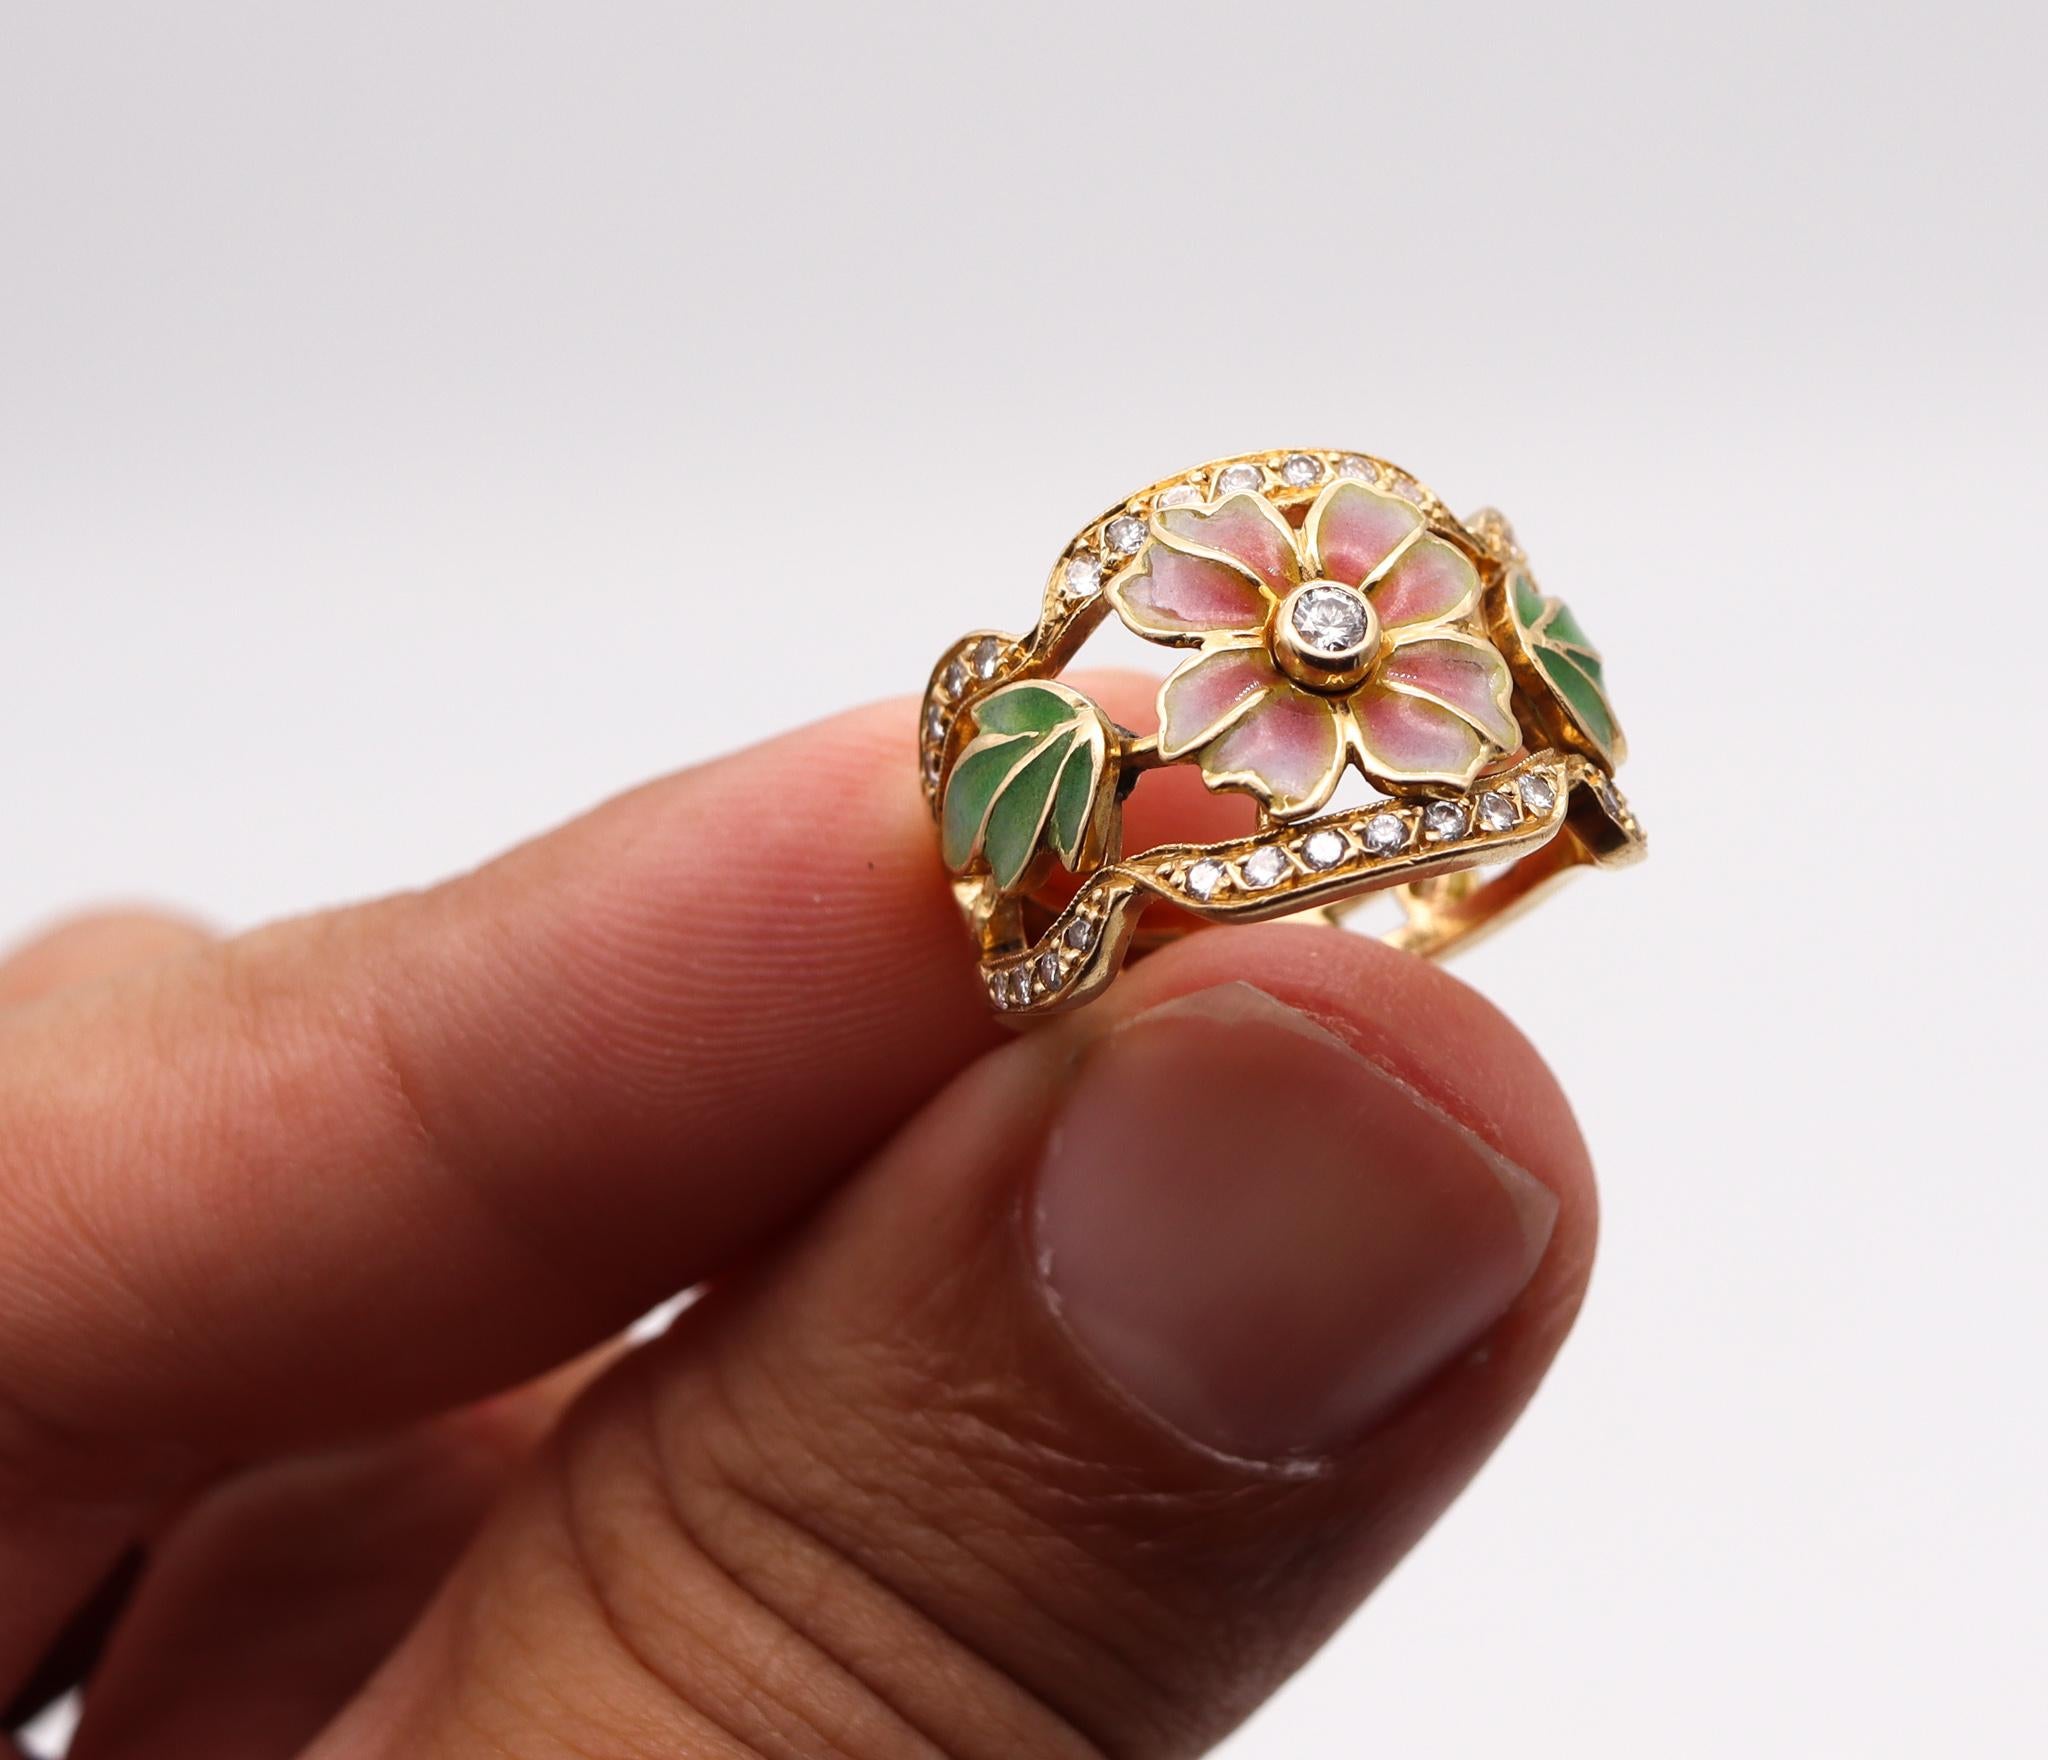 Masriera Art Nouveau Plique À Jour Enamel Ring in 18Kt Yellow Gold with Diamonds In Excellent Condition For Sale In Miami, FL